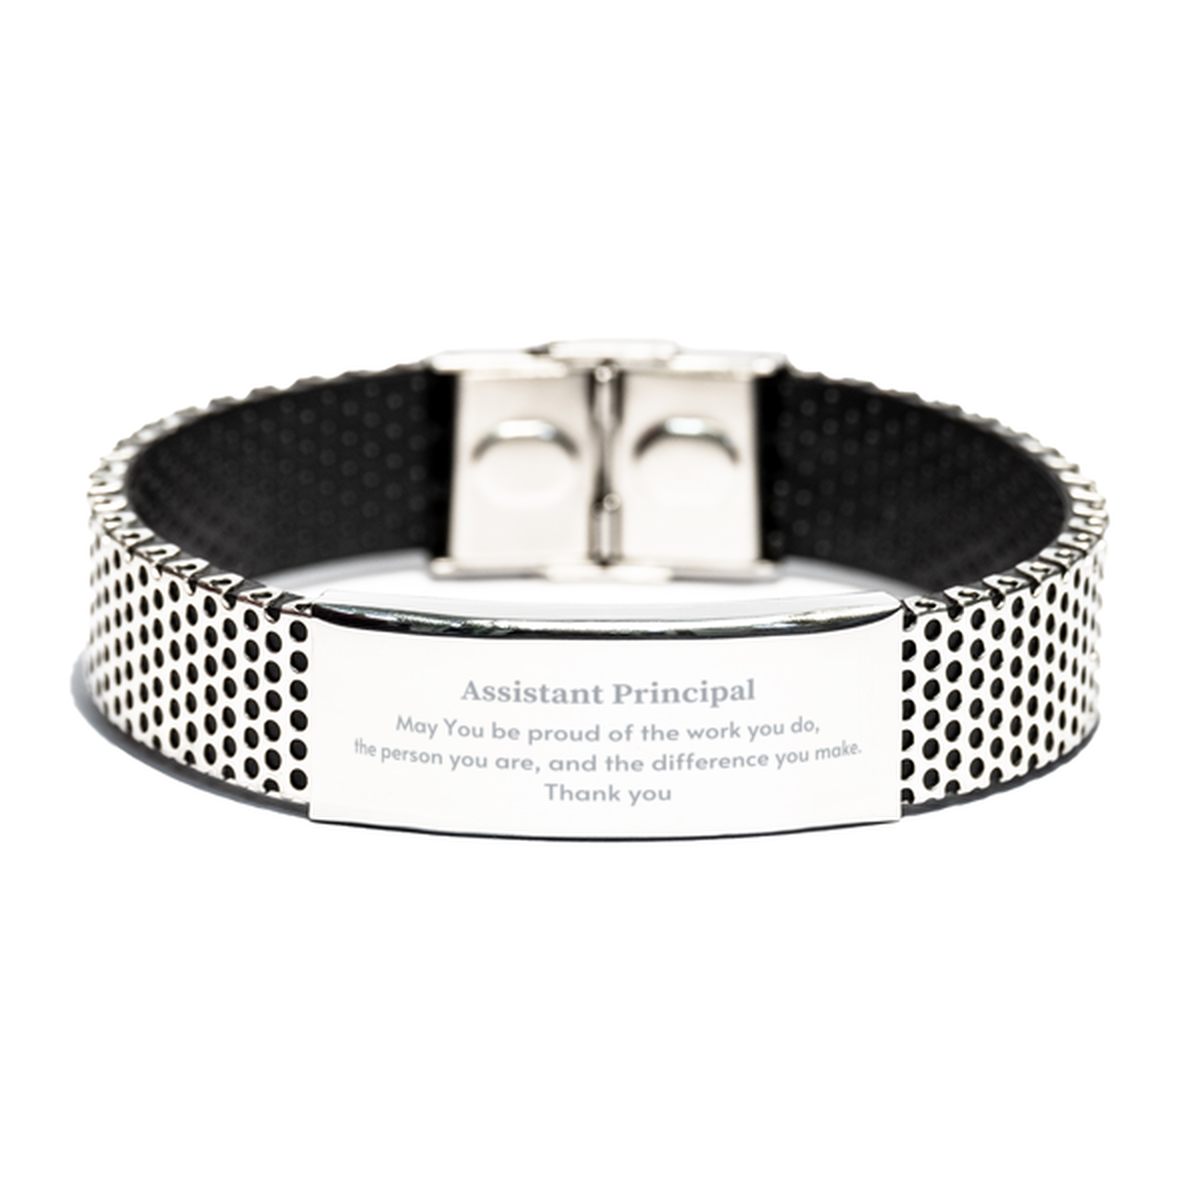 Heartwarming Stainless Steel Bracelet Retirement Coworkers Gifts for Assistant Principal, Assistant Principal May You be proud of the work you do, the person you are Gifts for Boss Men Women Friends